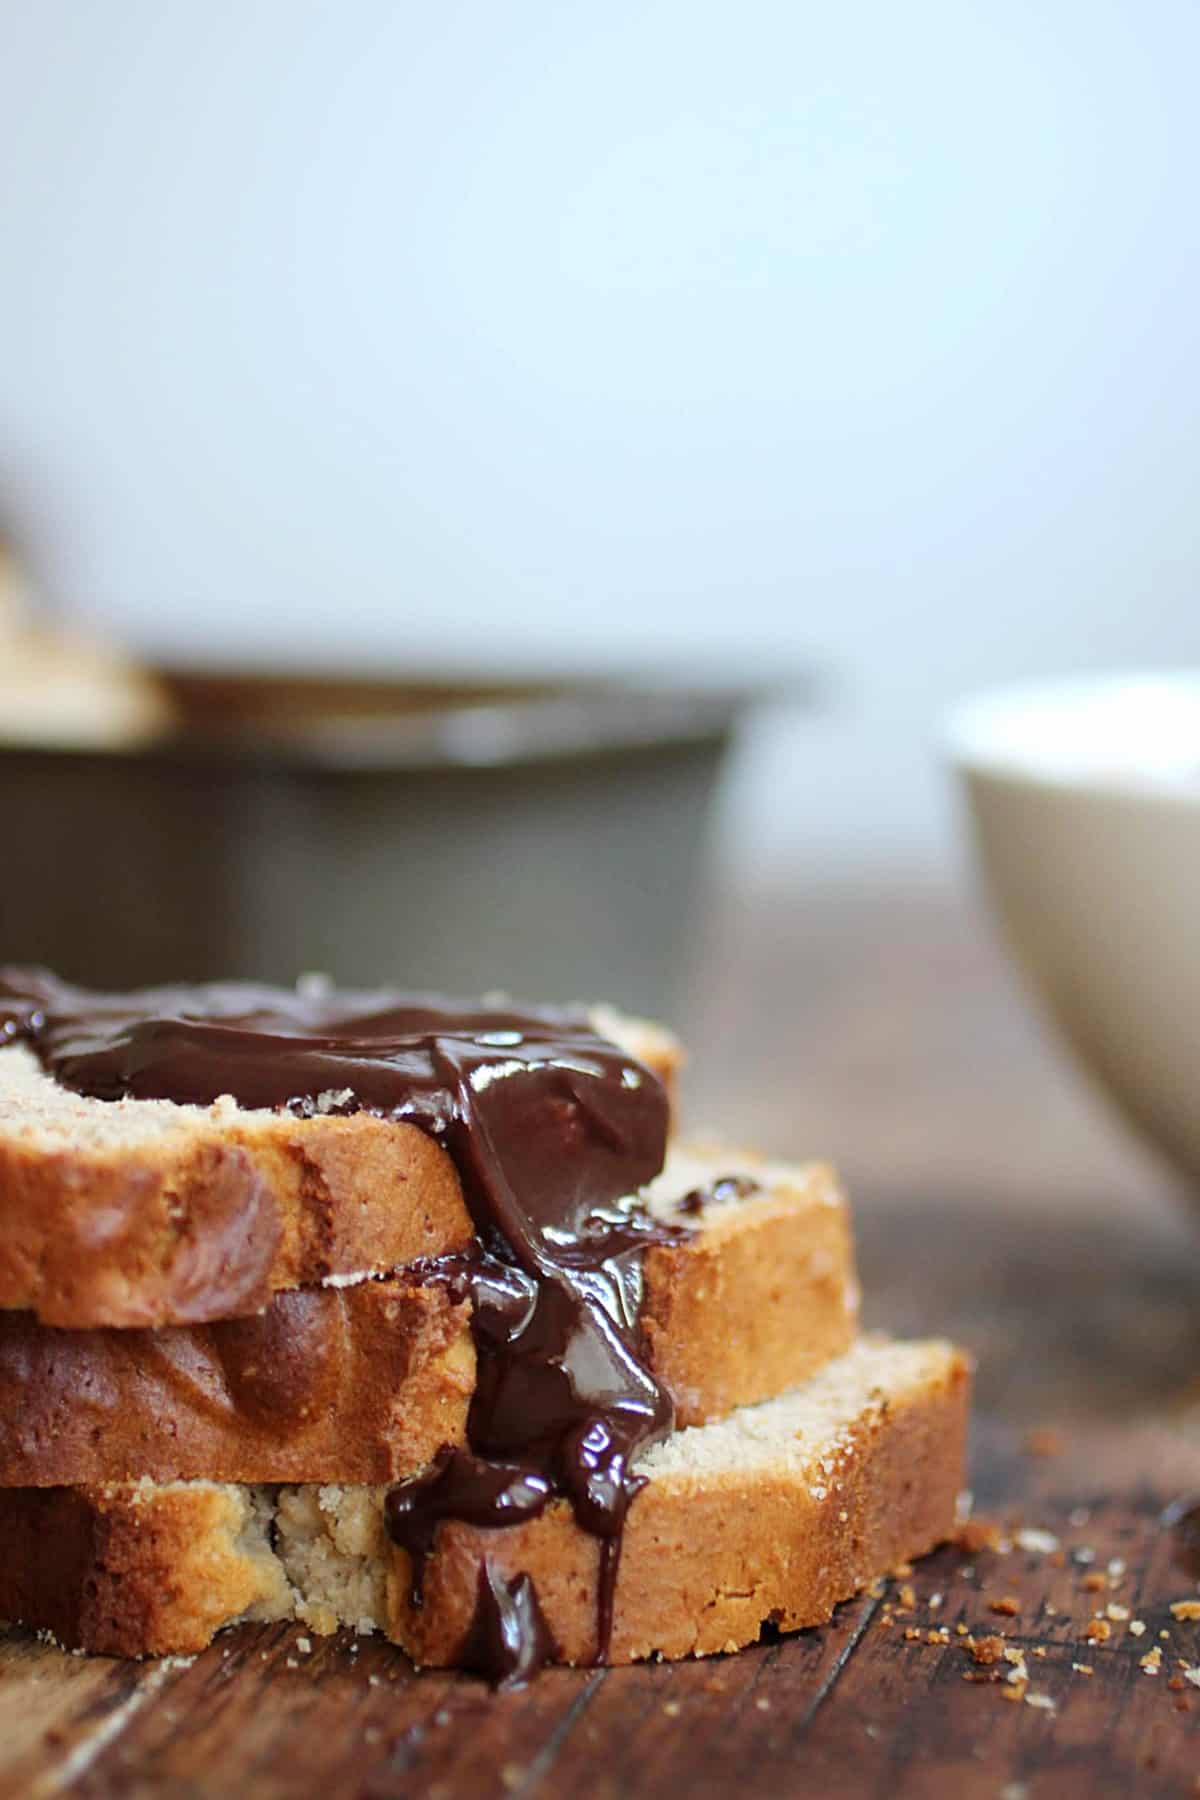 Stack of quick bread slices with chocolate sauce, wooden table, metal pan in background